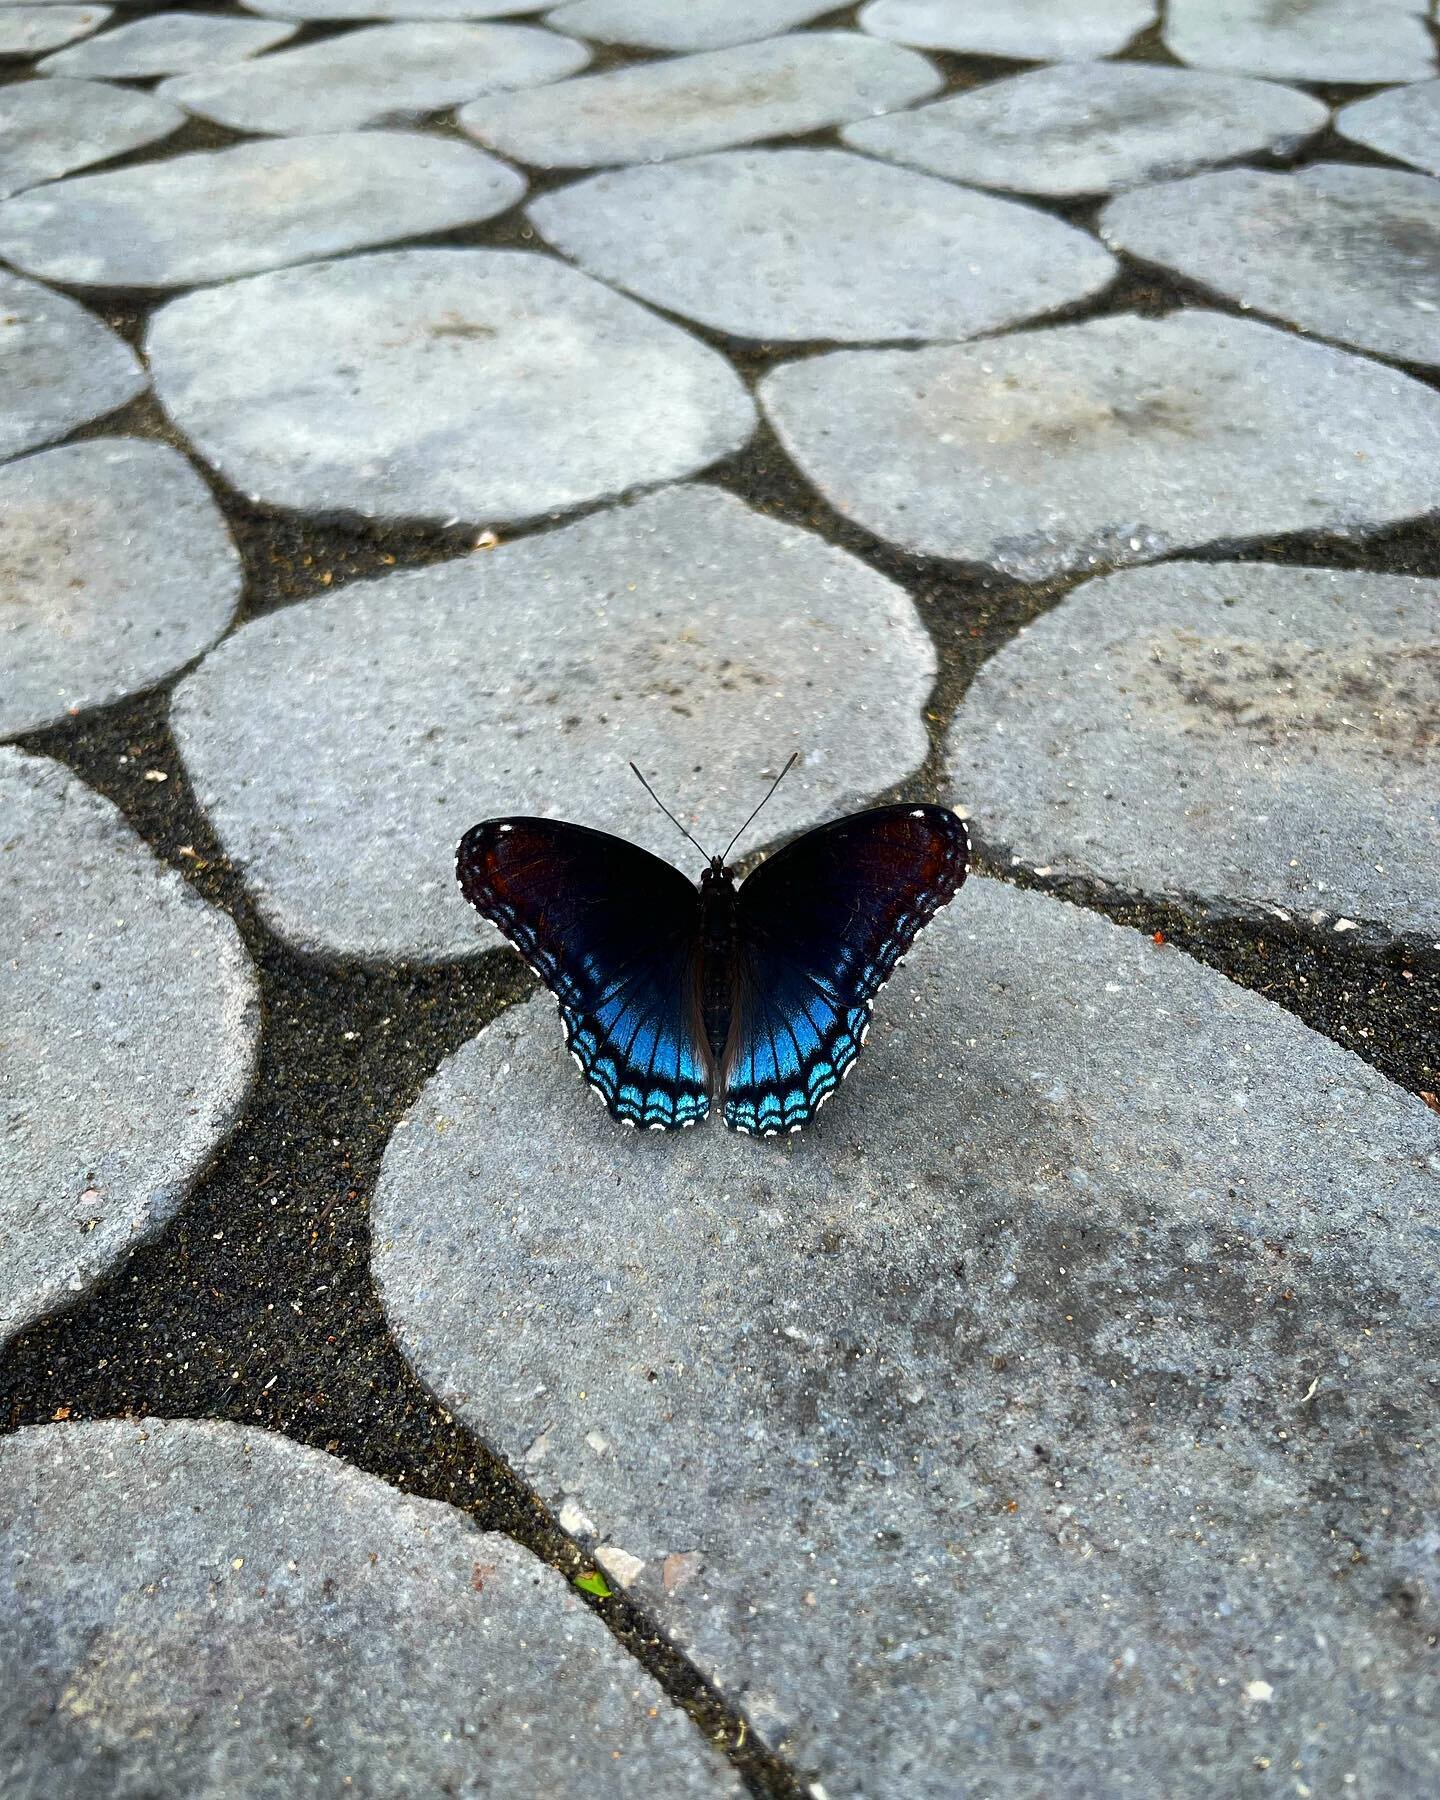 This little guy has been hanging out on these Techo Bloc Antika pavers all day! Even the silly butterfly knows a good paver when he sees one!